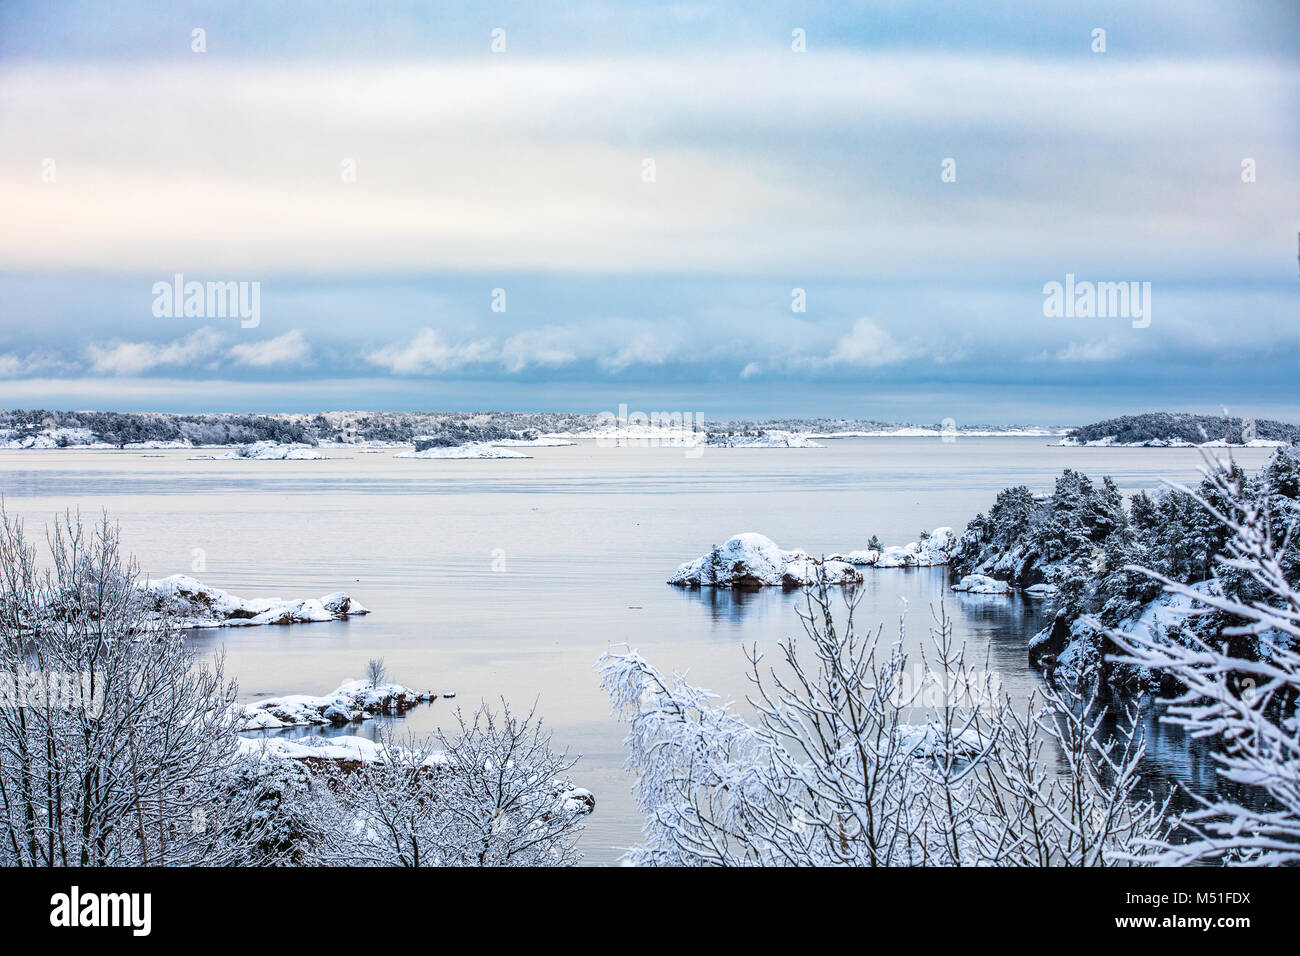 Beautiful winter day at Odderoya in Kristiansand, Norway. Trees covered in snow. The ocean and archipelago in the background. Stock Photo